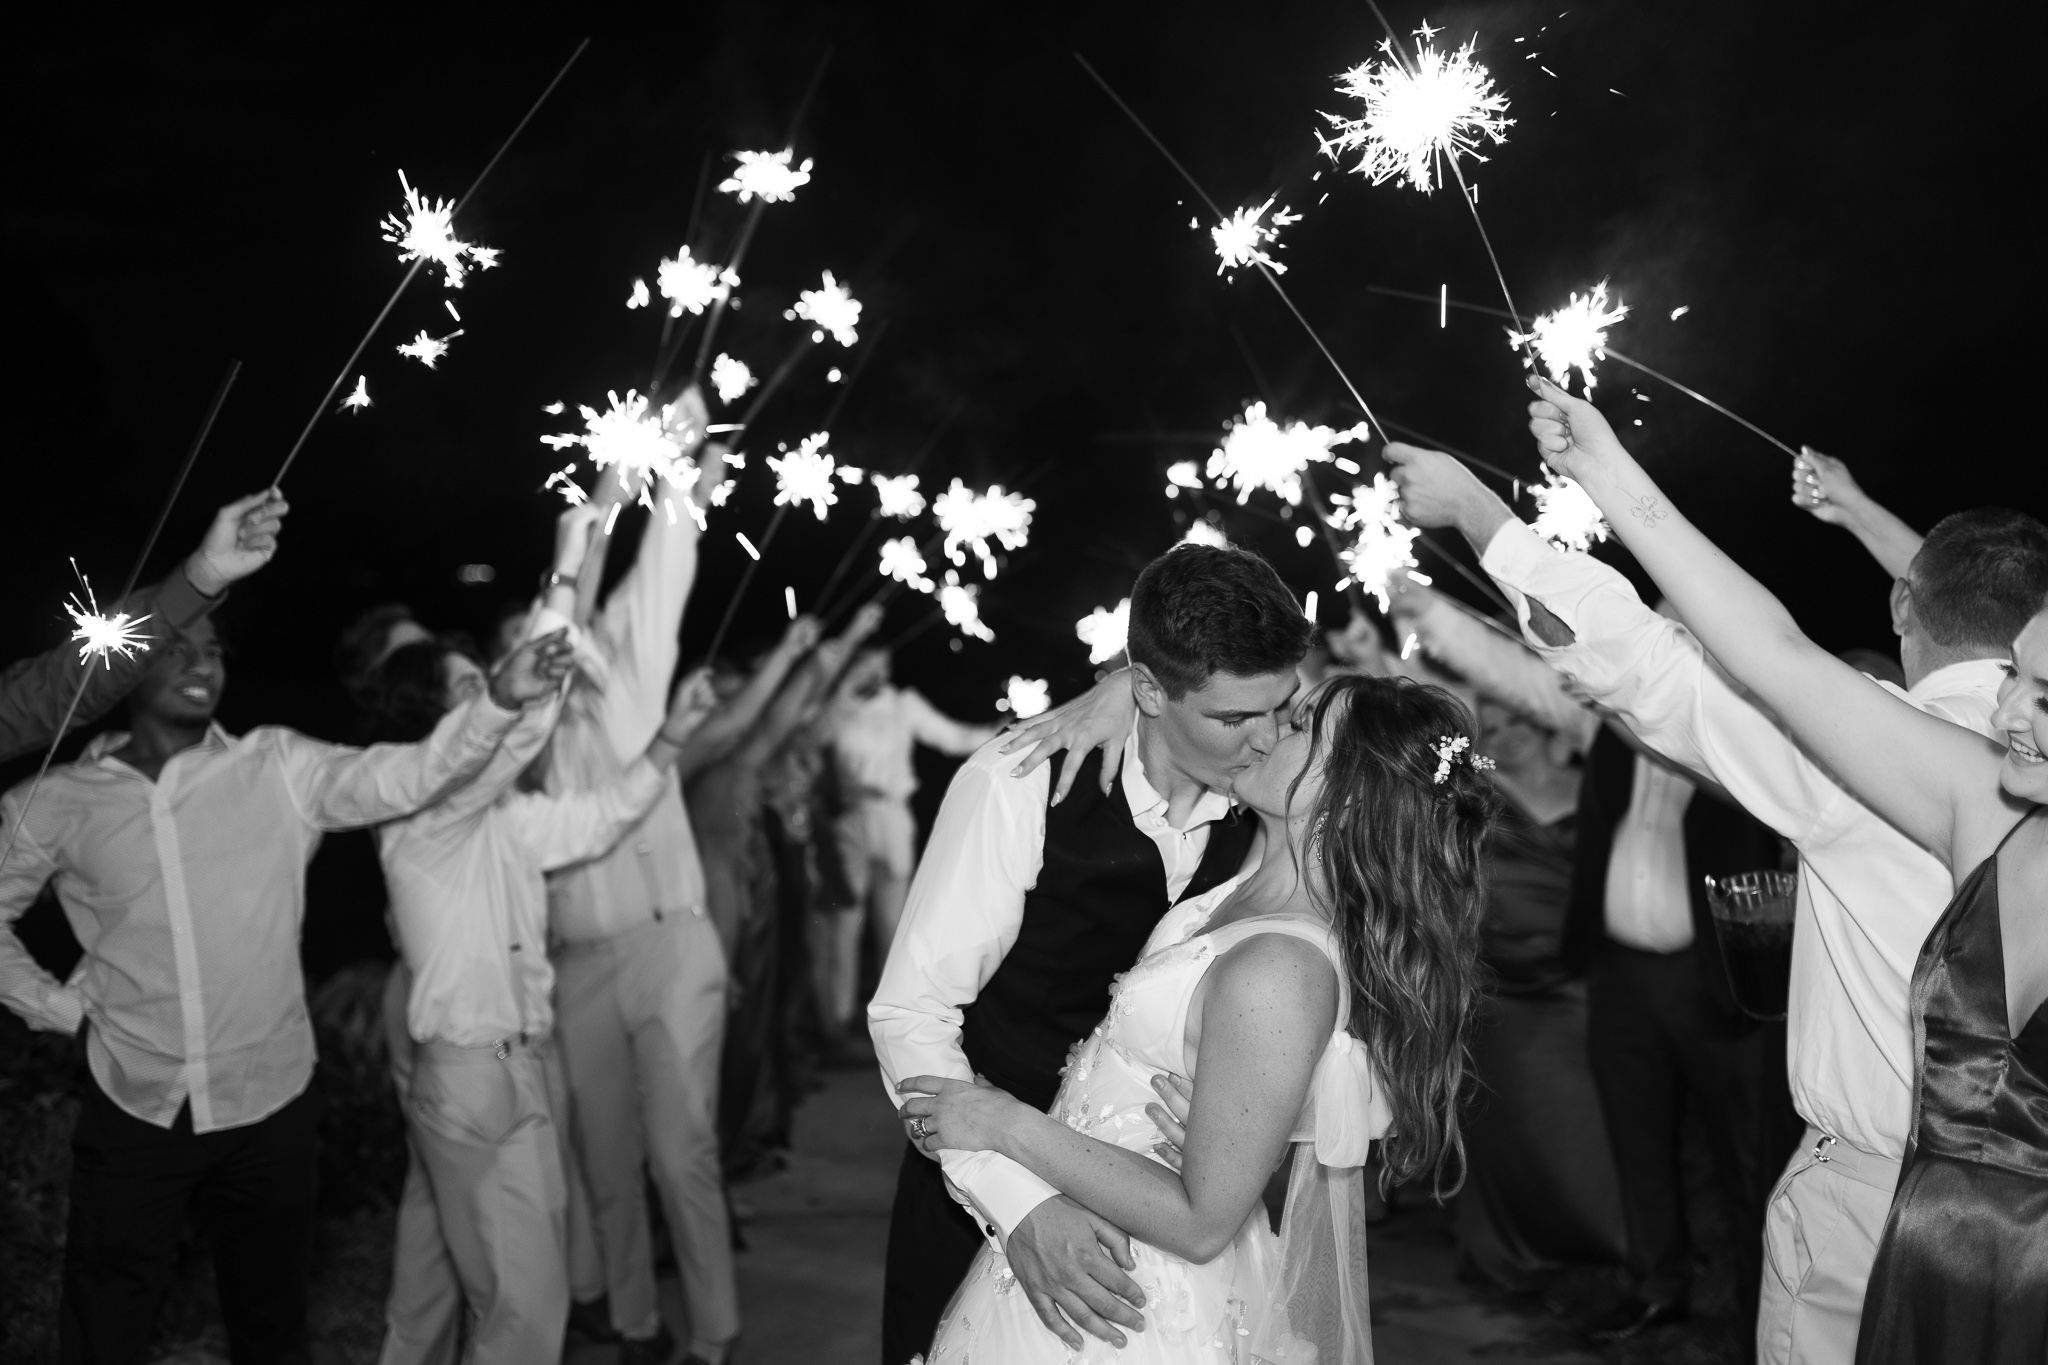 Wedding day sparkler exit shot of Bride & groom kissing at the end of the tunnel